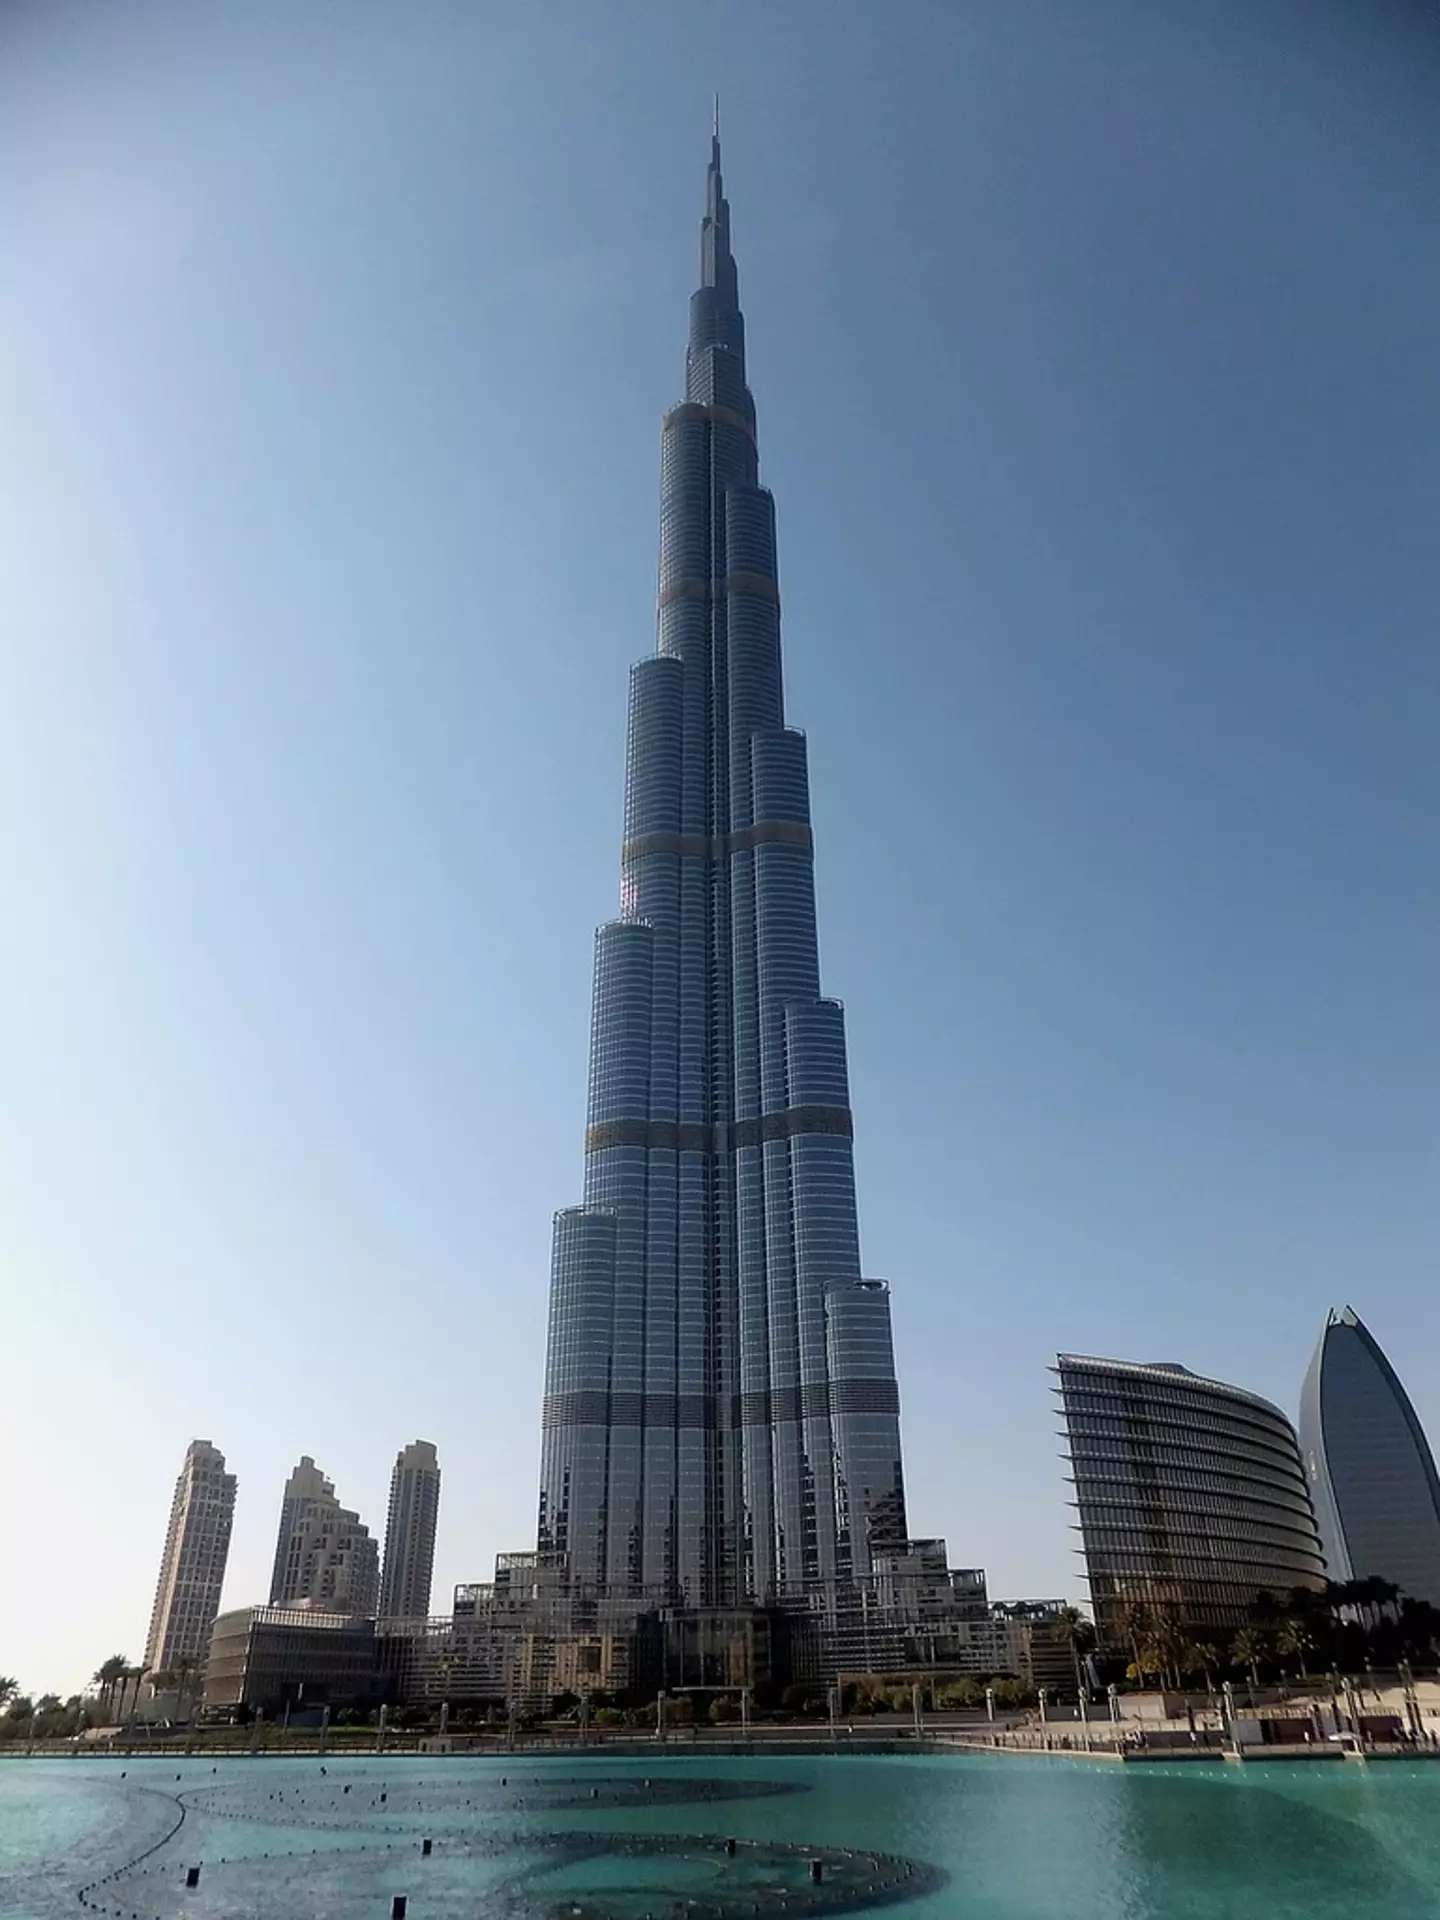 The Burj Khalifa is the tallest building in the word.